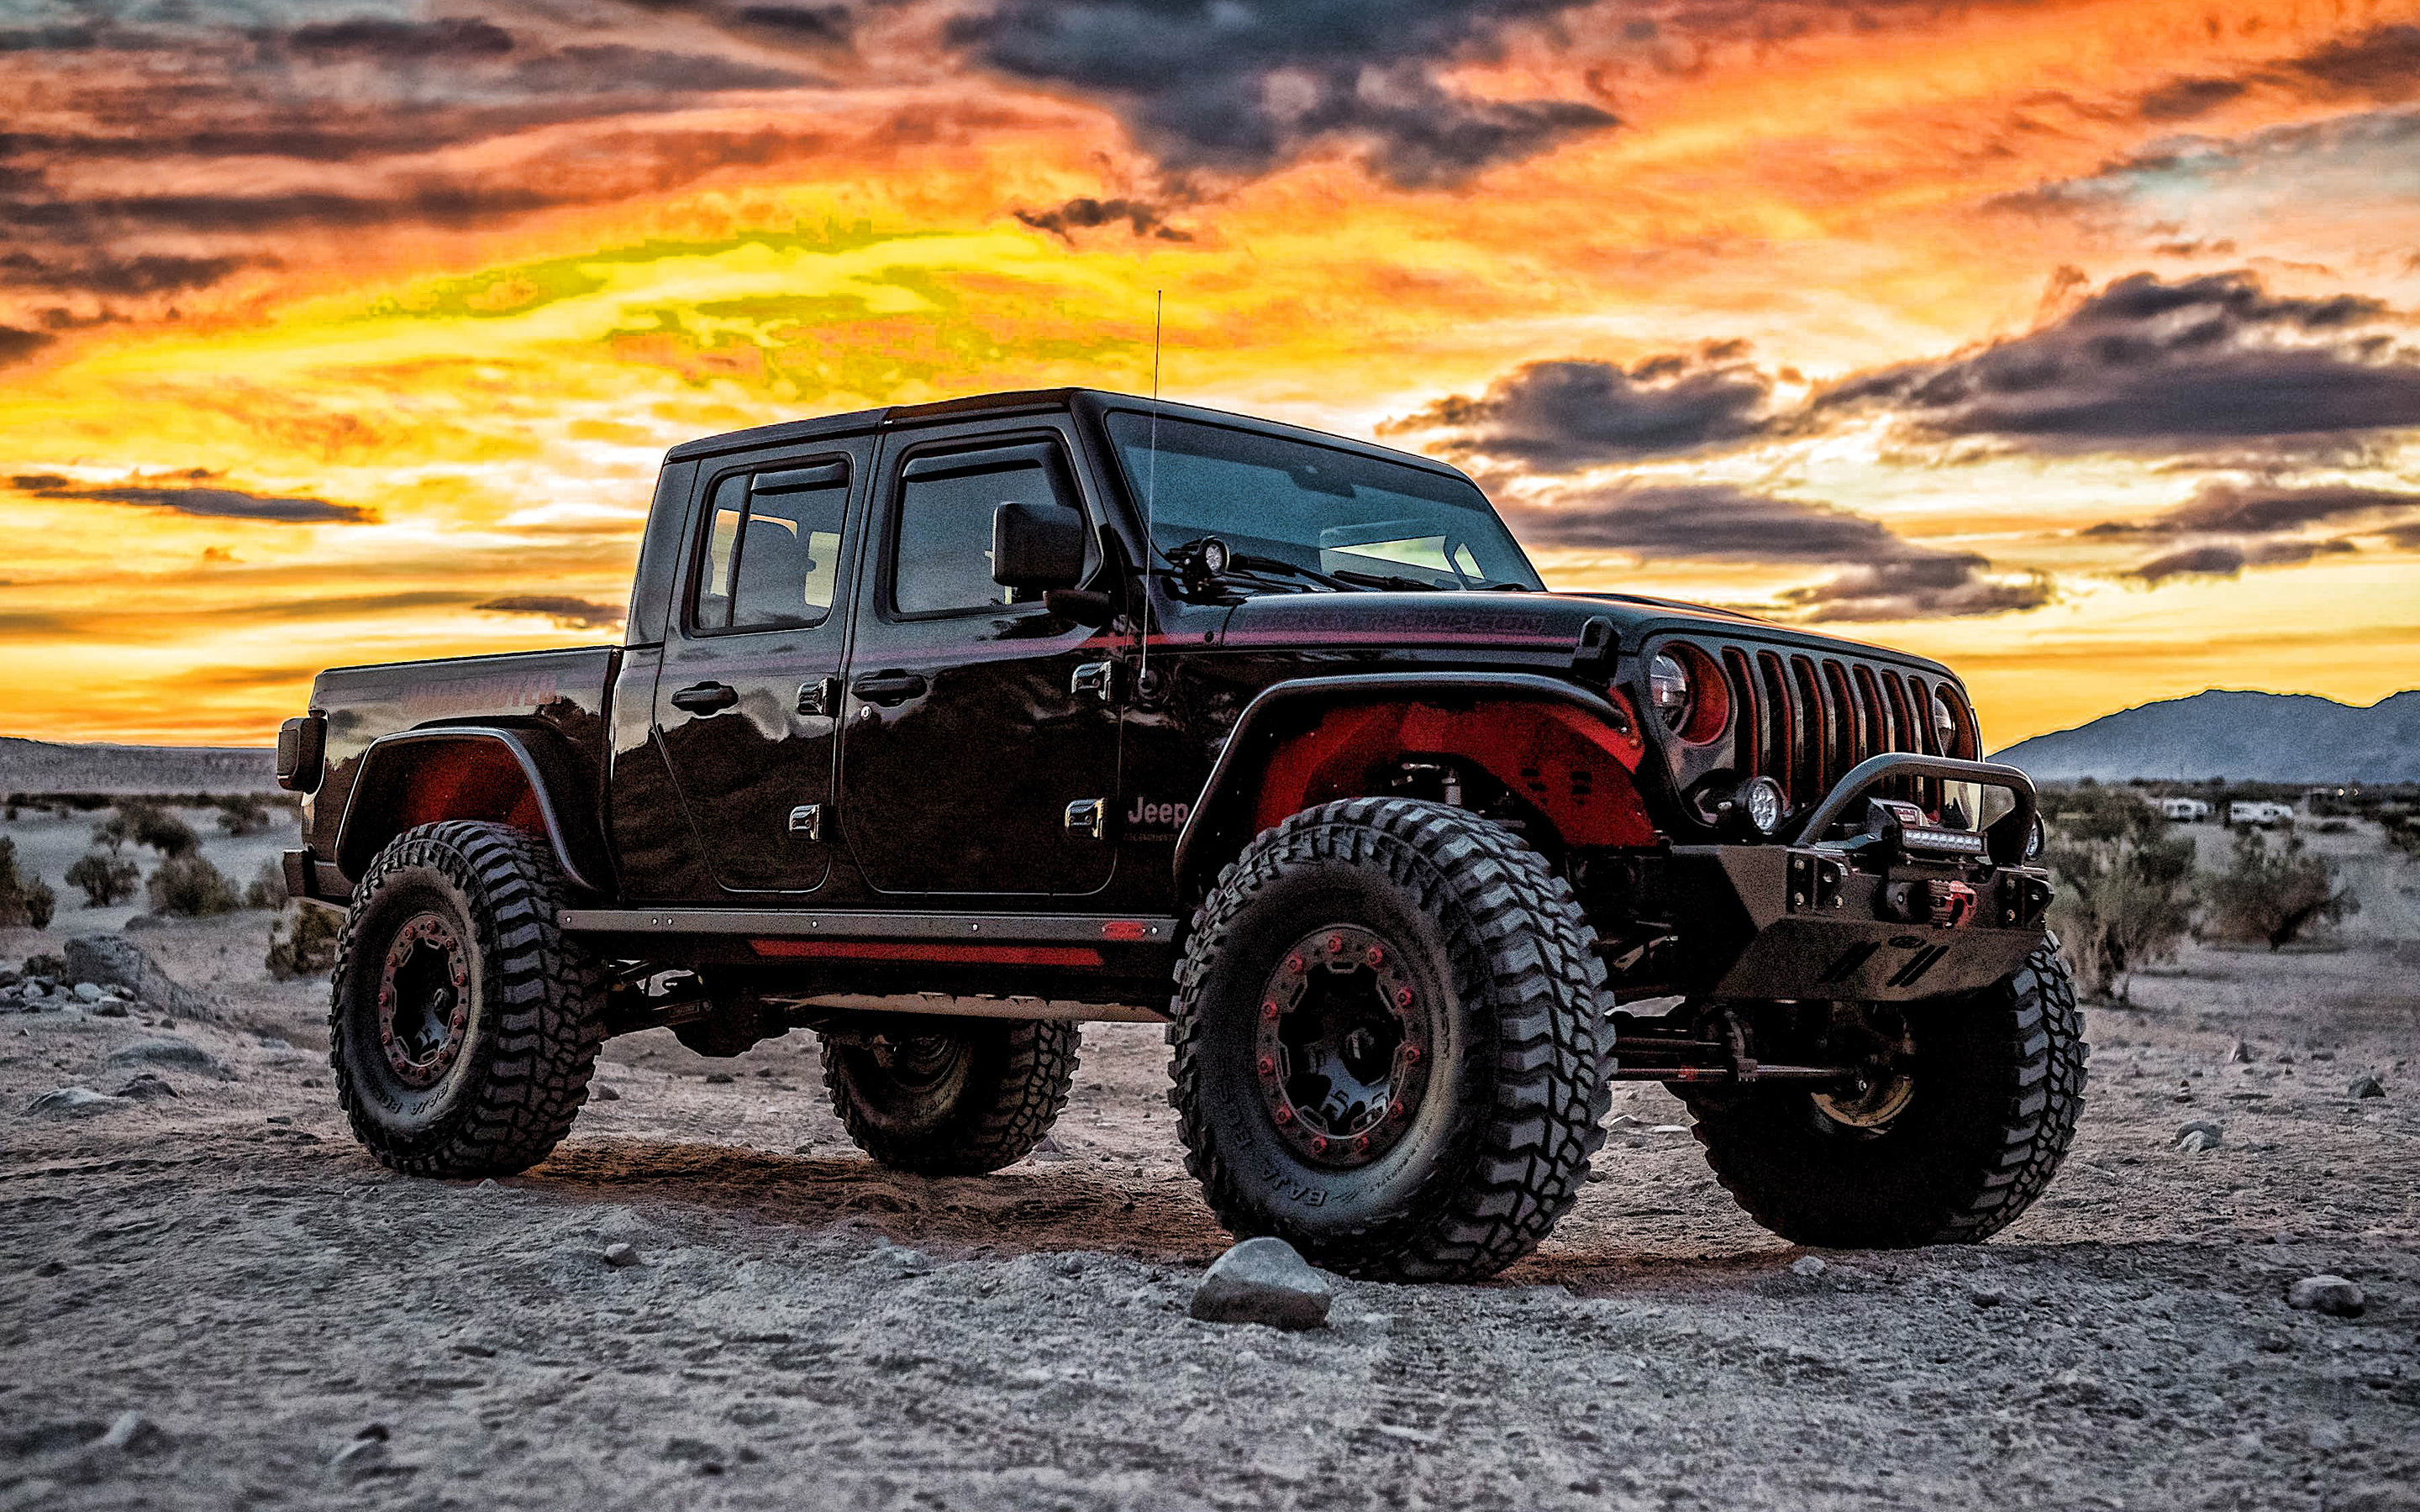 Jeep Gladiator, 2020 wallpapers, High-quality images, Auto enthusiasts, 2880x1800 HD Desktop